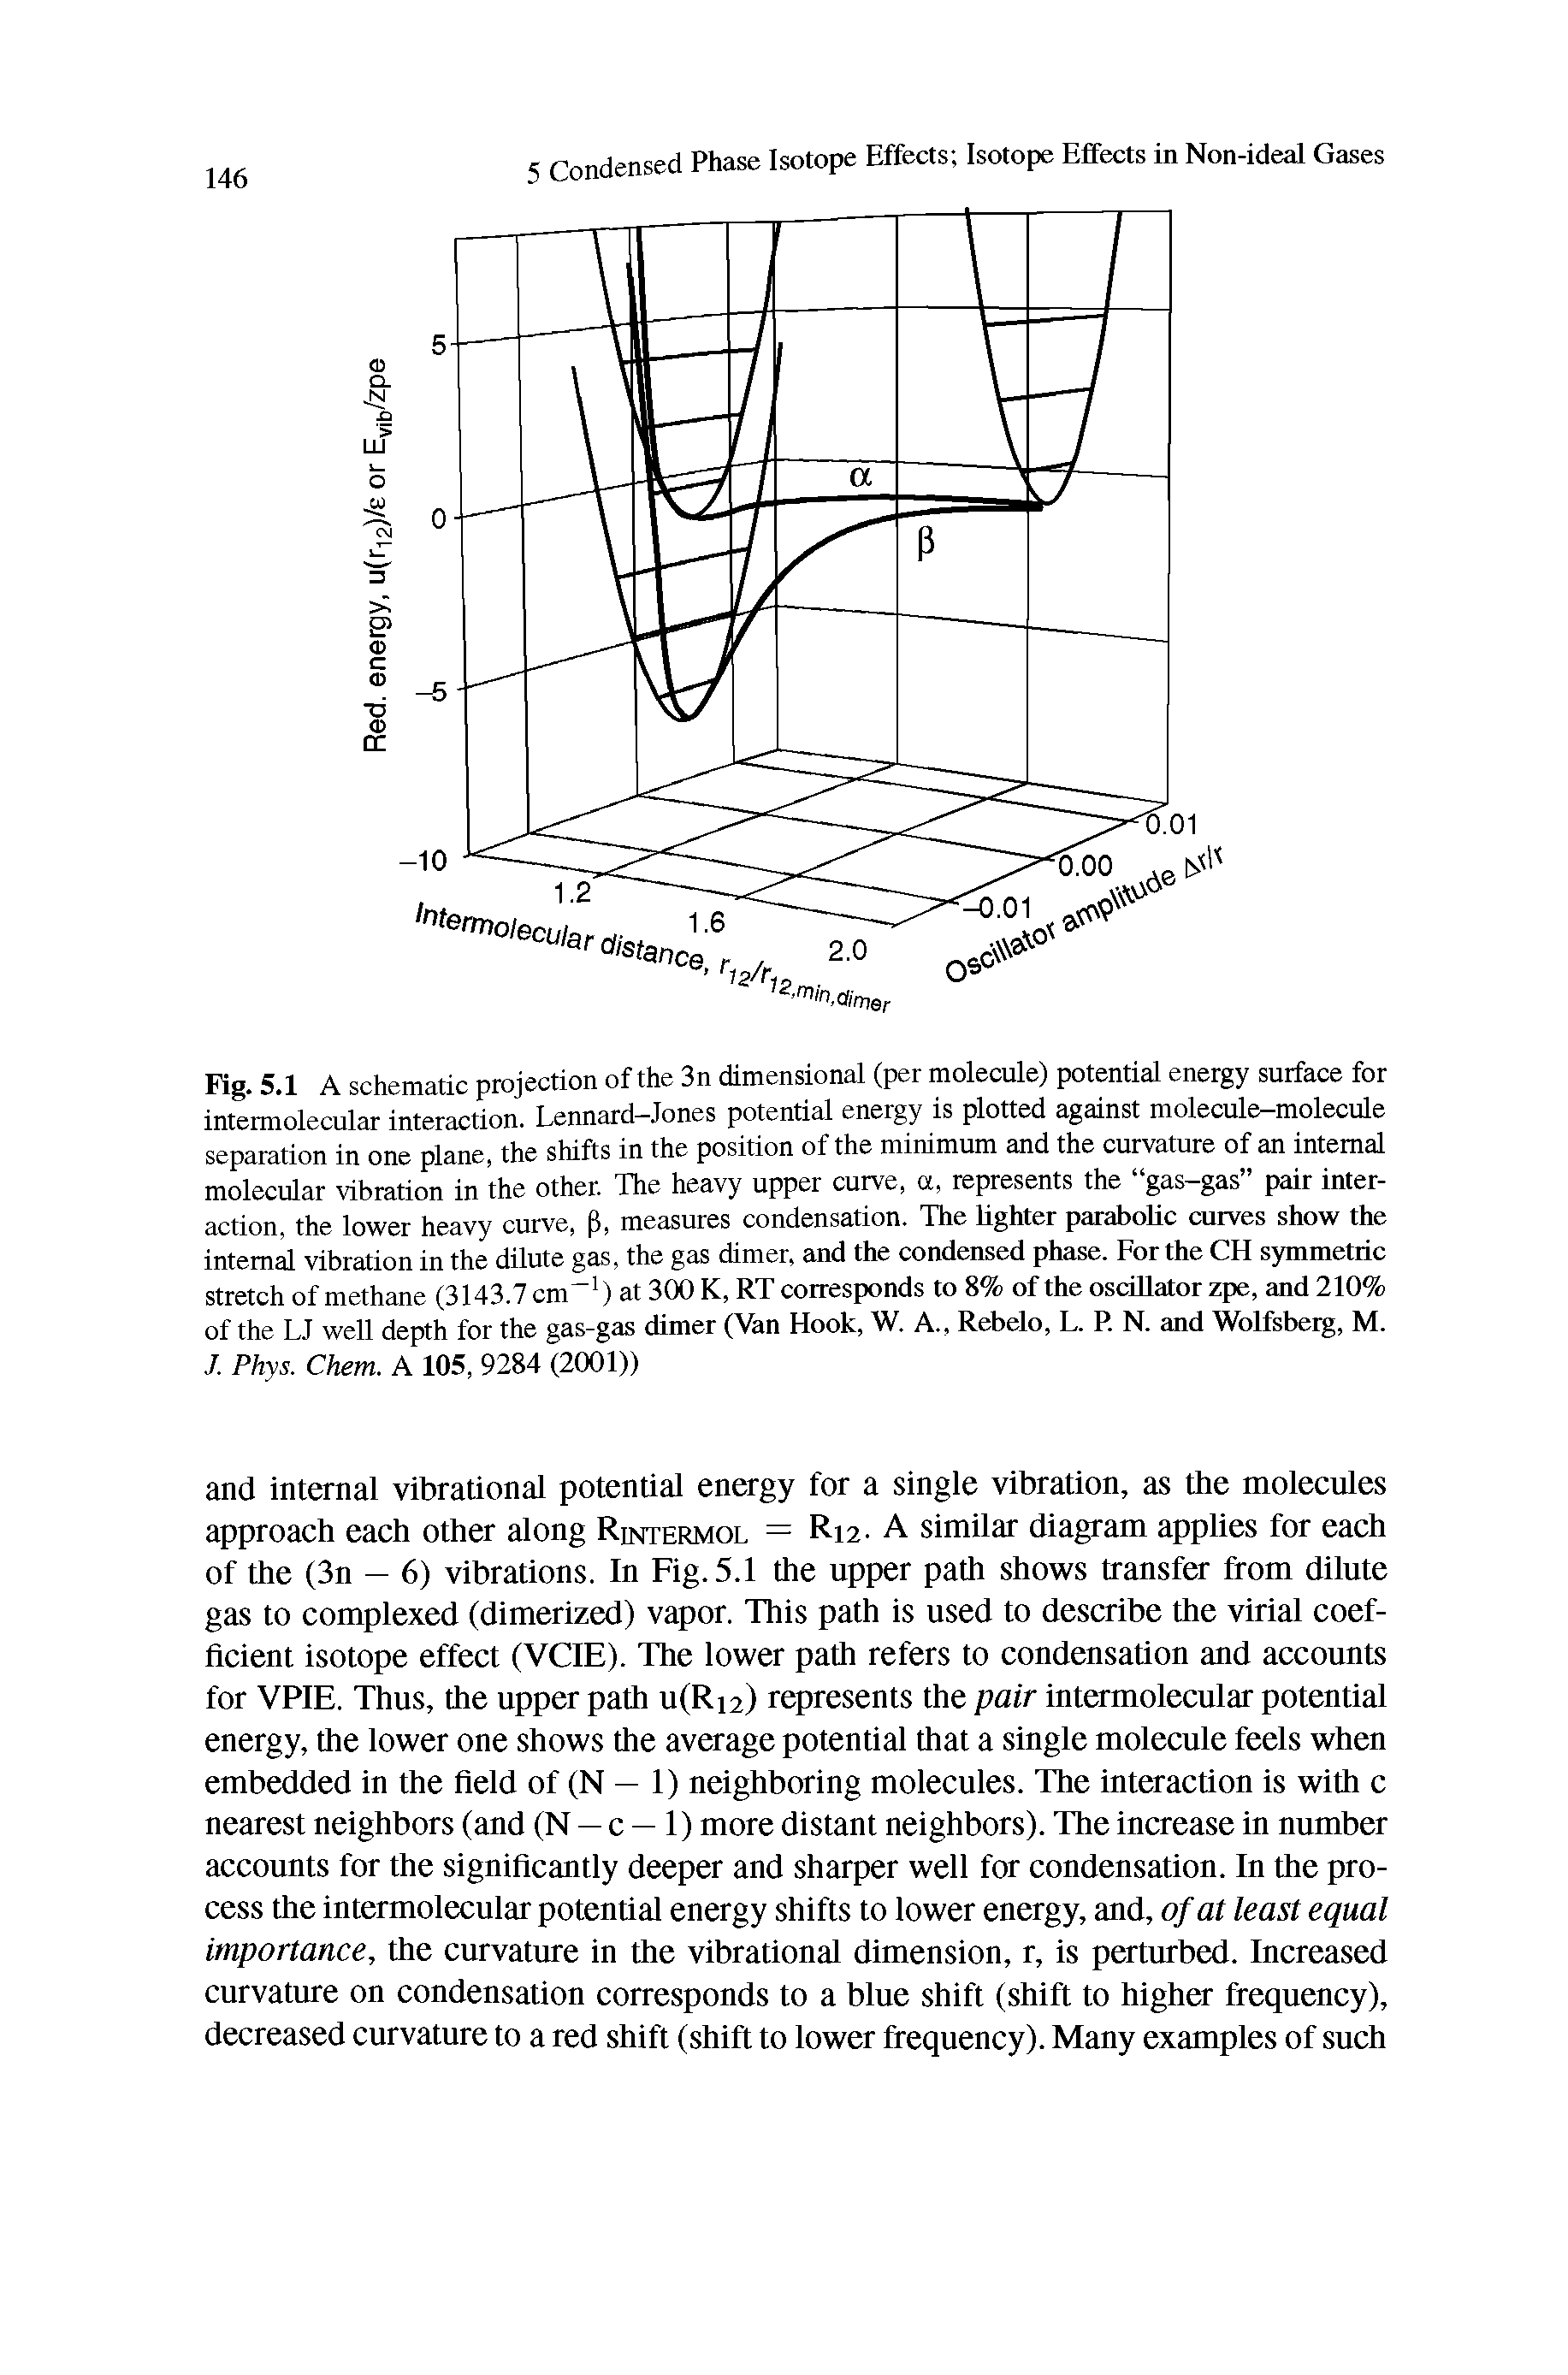 Fig. 5.1 A schematic projection of the 3n dimensional (per molecule) potential energy surface for intermolecular interaction. Lennard-Jones potential energy is plotted against molecule-molecule separation in one plane, the shifts in the position of the minimum and the curvature of an internal molecular vibration in the other. The heavy upper curve, a, represents the gas-gas pair interaction, the lower heavy curve, p, measures condensation. The lighter parabolic curves show the internal vibration in the dilute gas, the gas dimer, and the condensed phase. For the CH symmetric stretch of methane (3143.7 cm-1) at 300 K, RT corresponds to 8% of the oscillator zpe, and 210% of the LJ well depth for the gas-gas dimer (Van Hook, W. A., Rebelo, L. P. N. and Wolfsberg, M. /. Phys. Chem. A 105, 9284 (2001))...